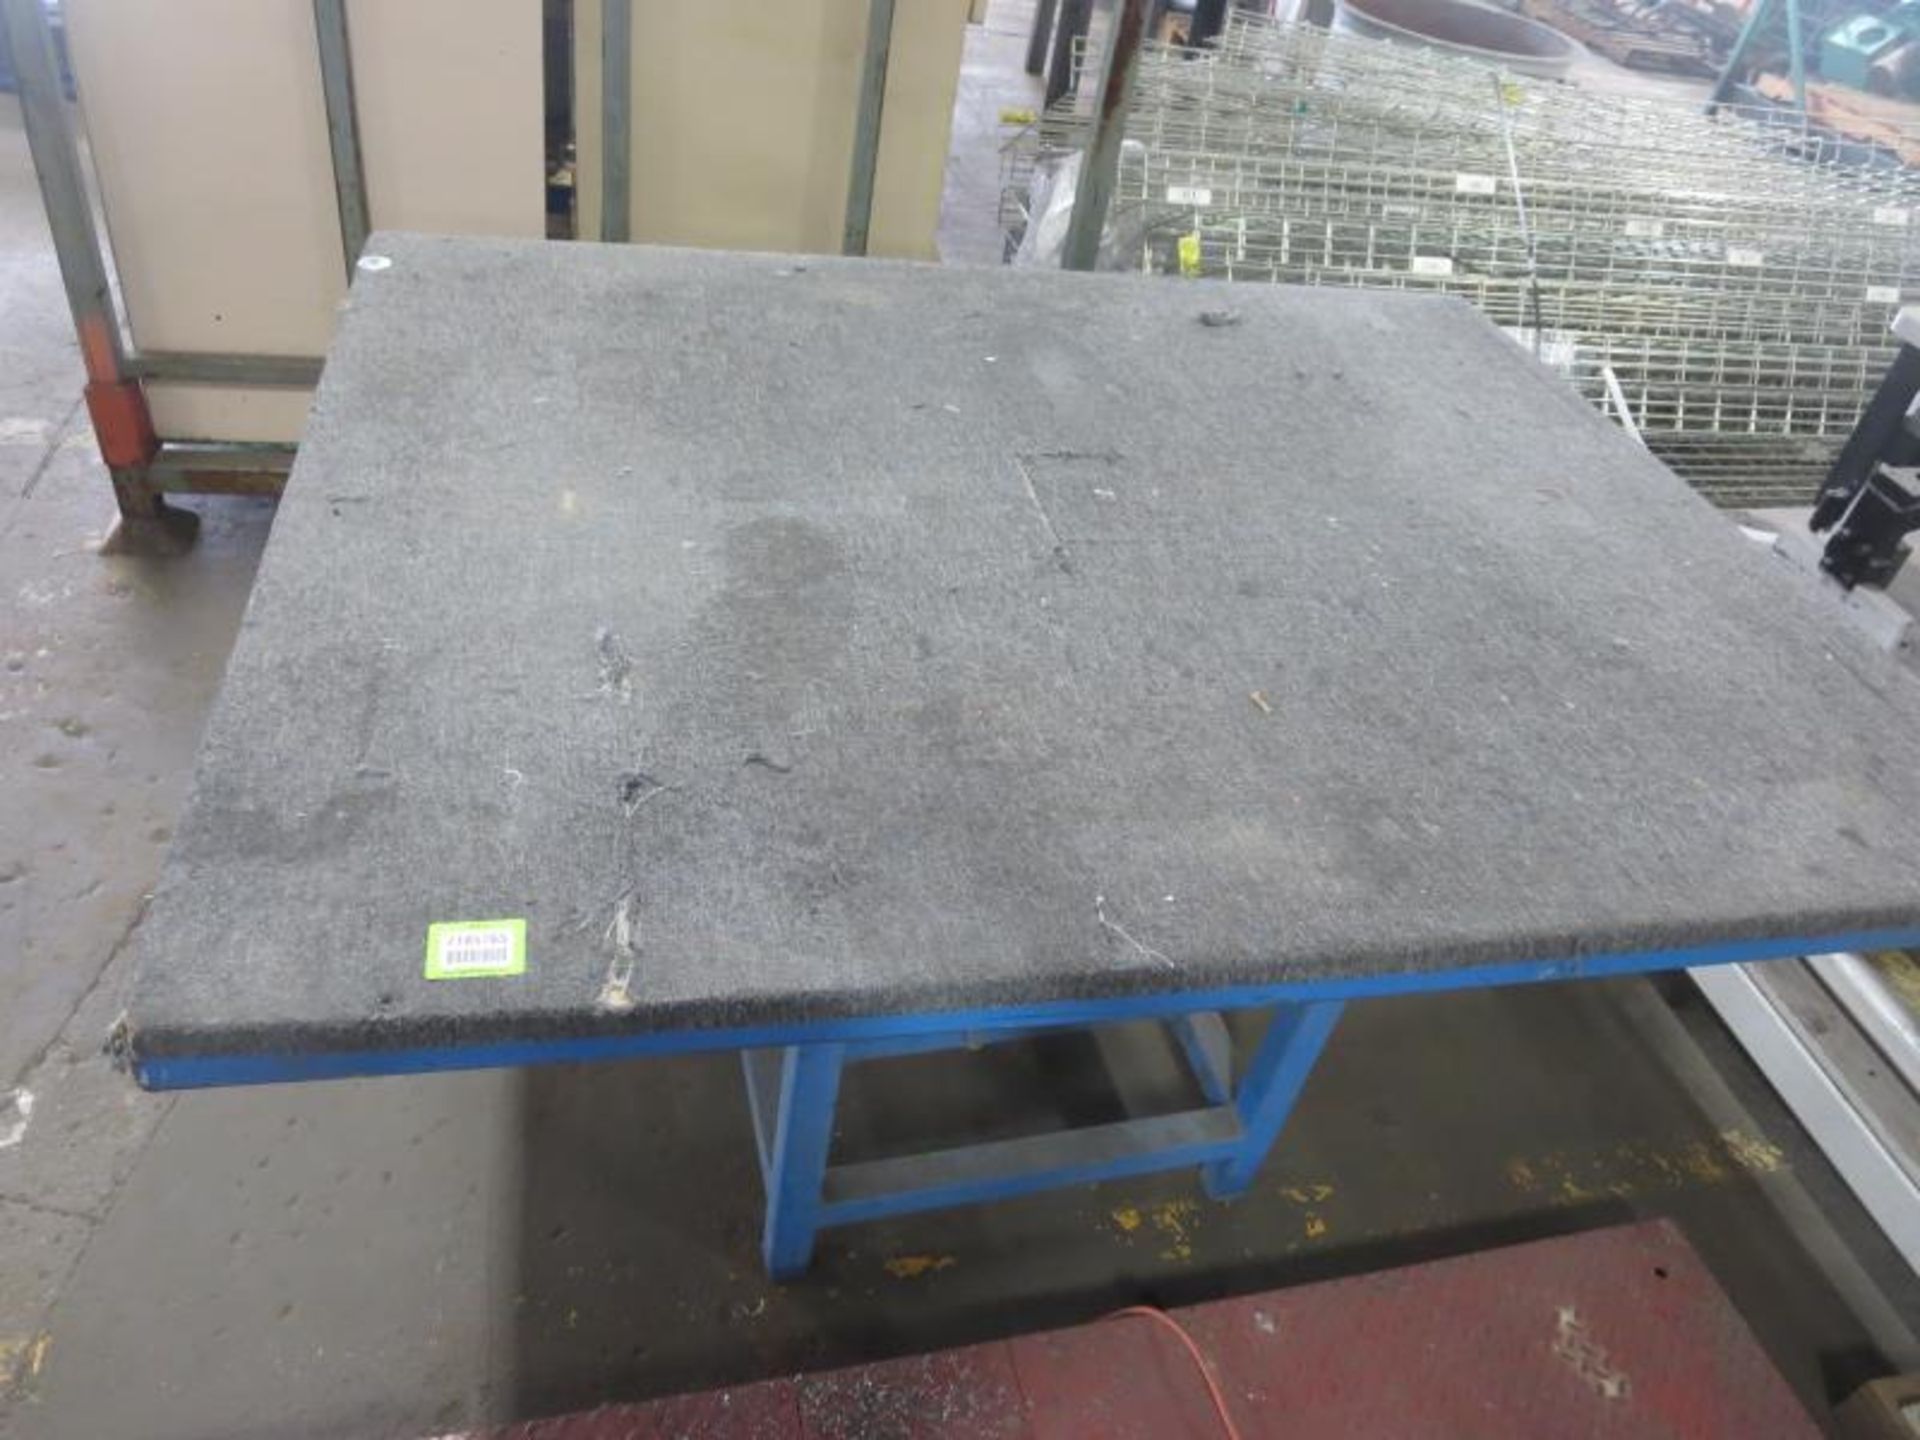 Rotating Work Table, 48" x 60" x 37"h with hydraulic lift. Hit # 2185765. M8-M9. Asset Located at - Bild 2 aus 3